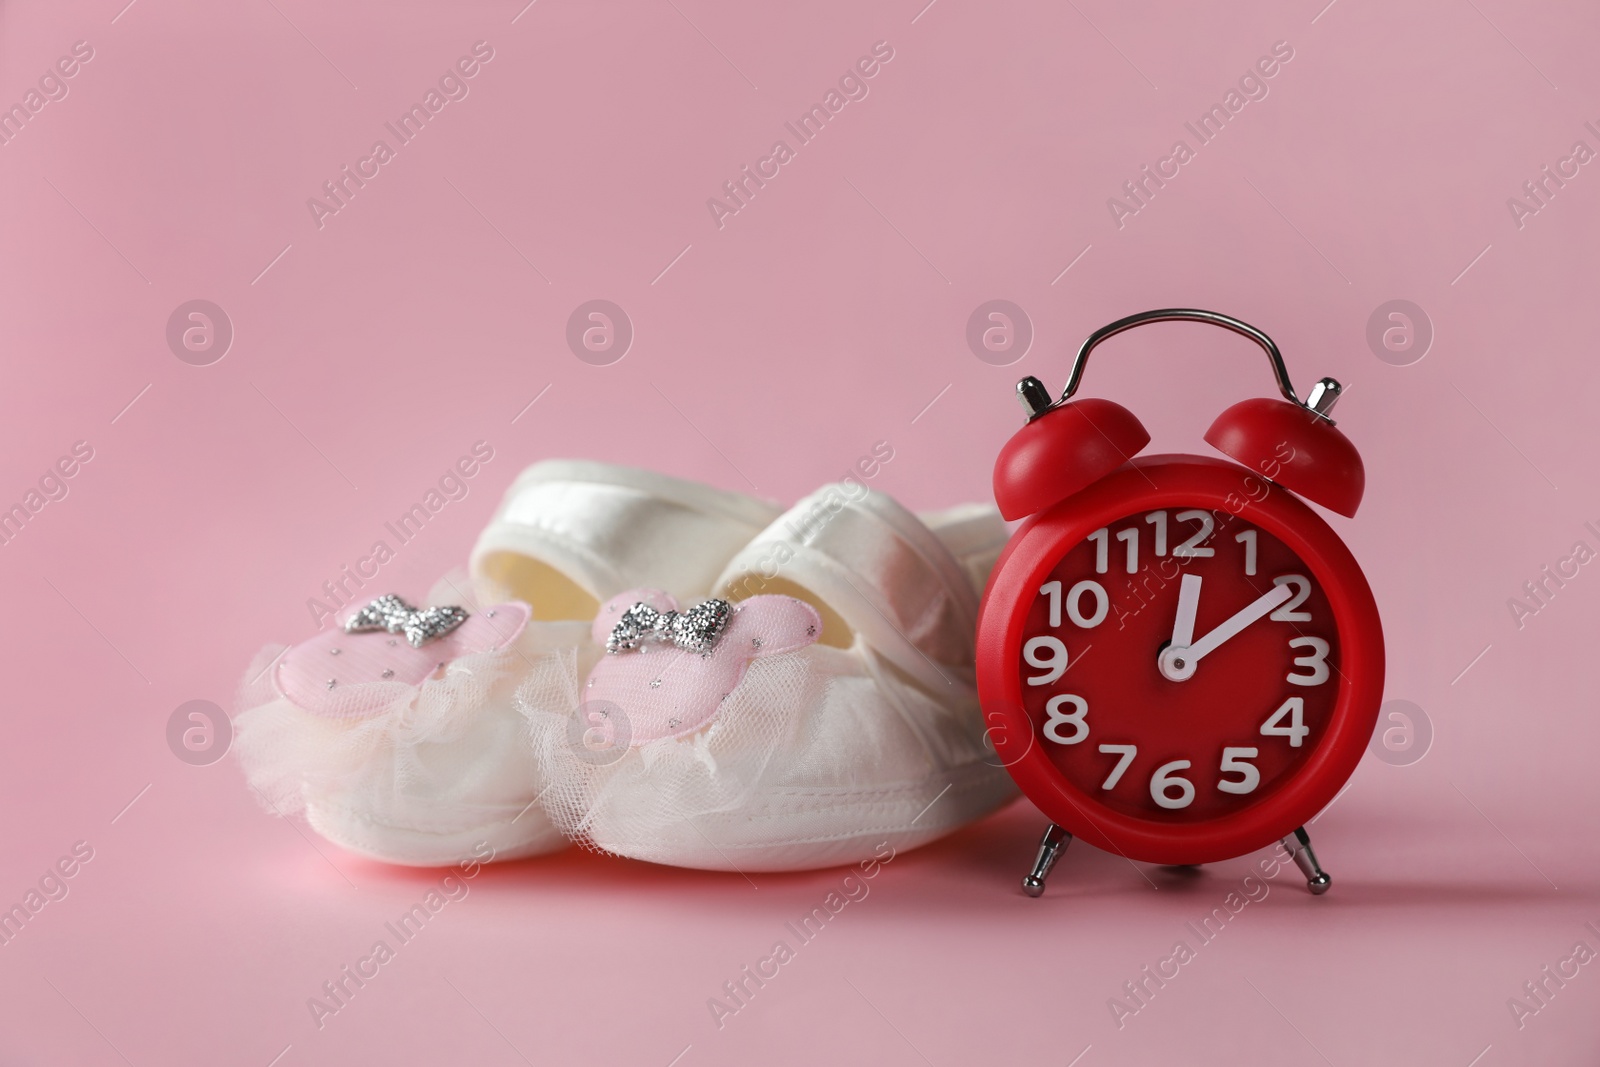 Photo of Alarm clock and baby booties on pink background. Time to give birth